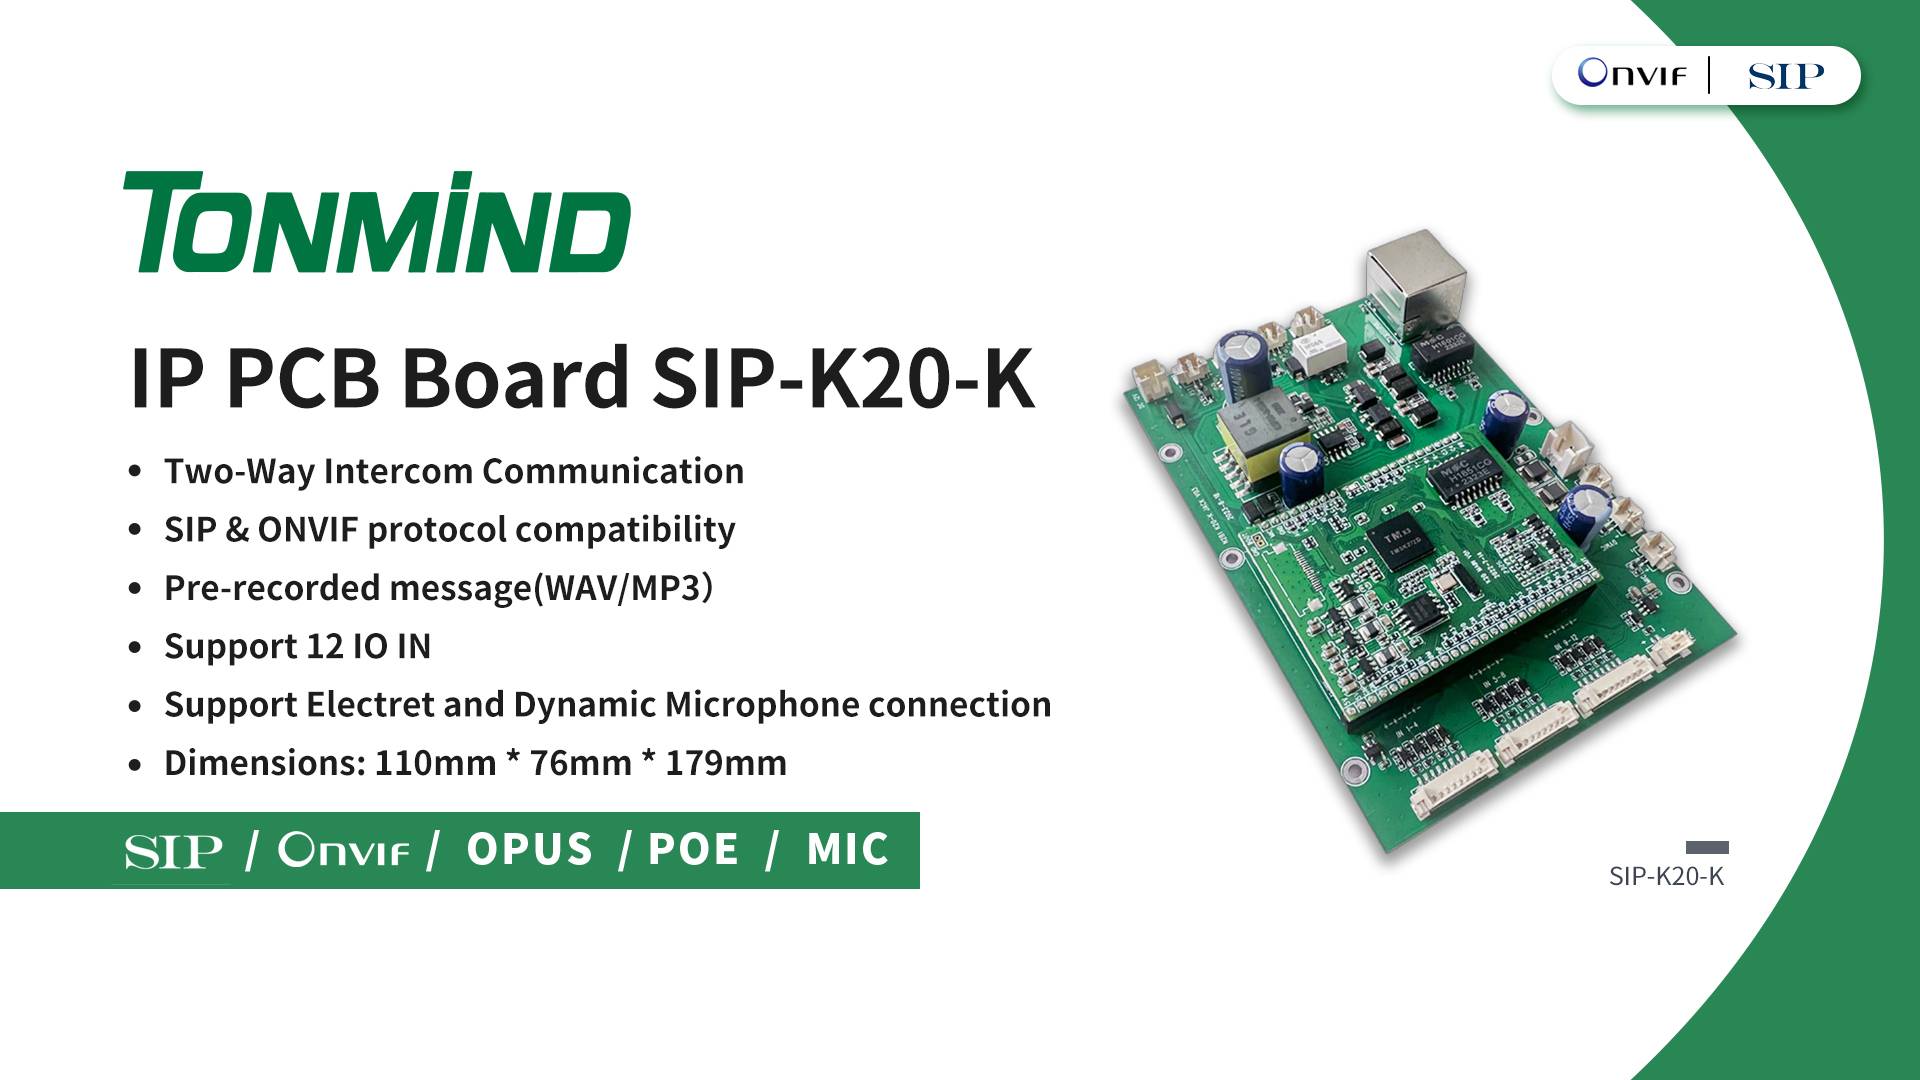 Tonmind Introduces New Product IP PCB Board K20-K for Enhanced Communication Solutions